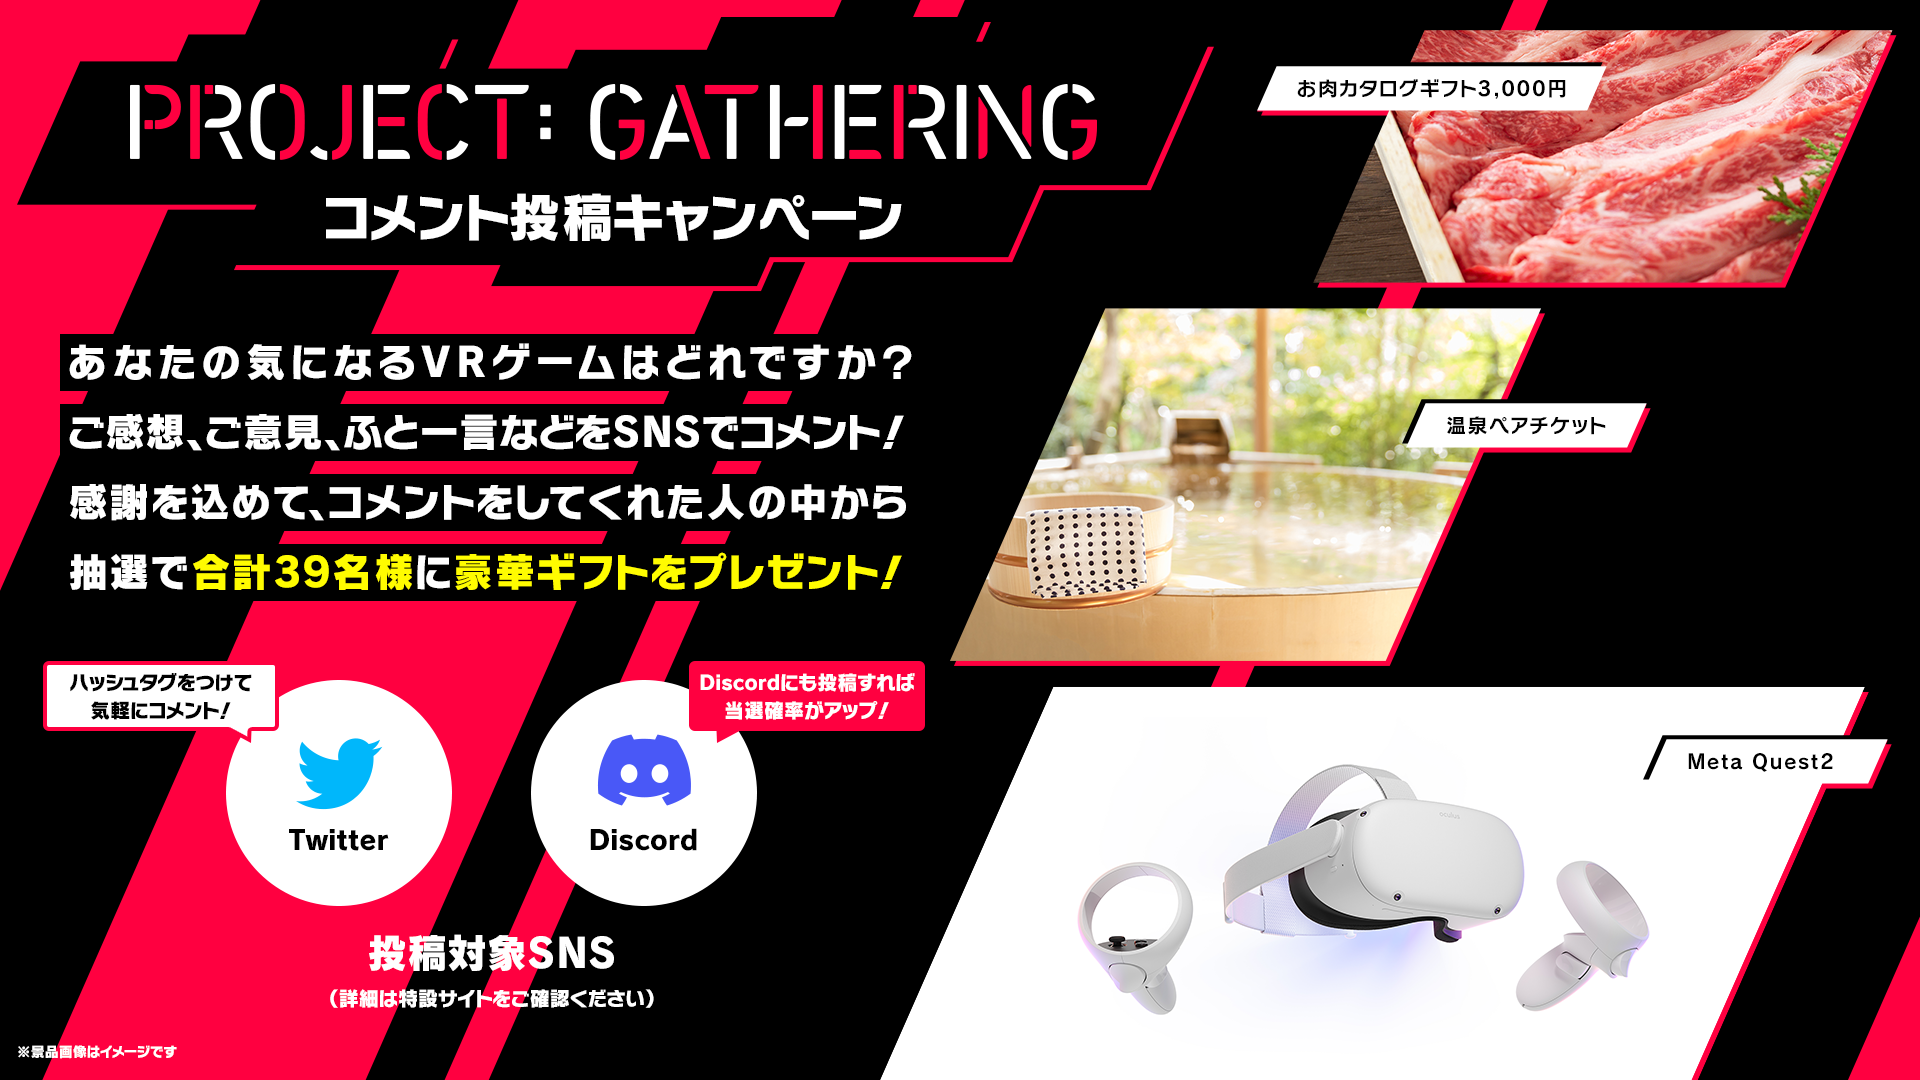 【PROJECT GATHERING】キャンペーン画像.png